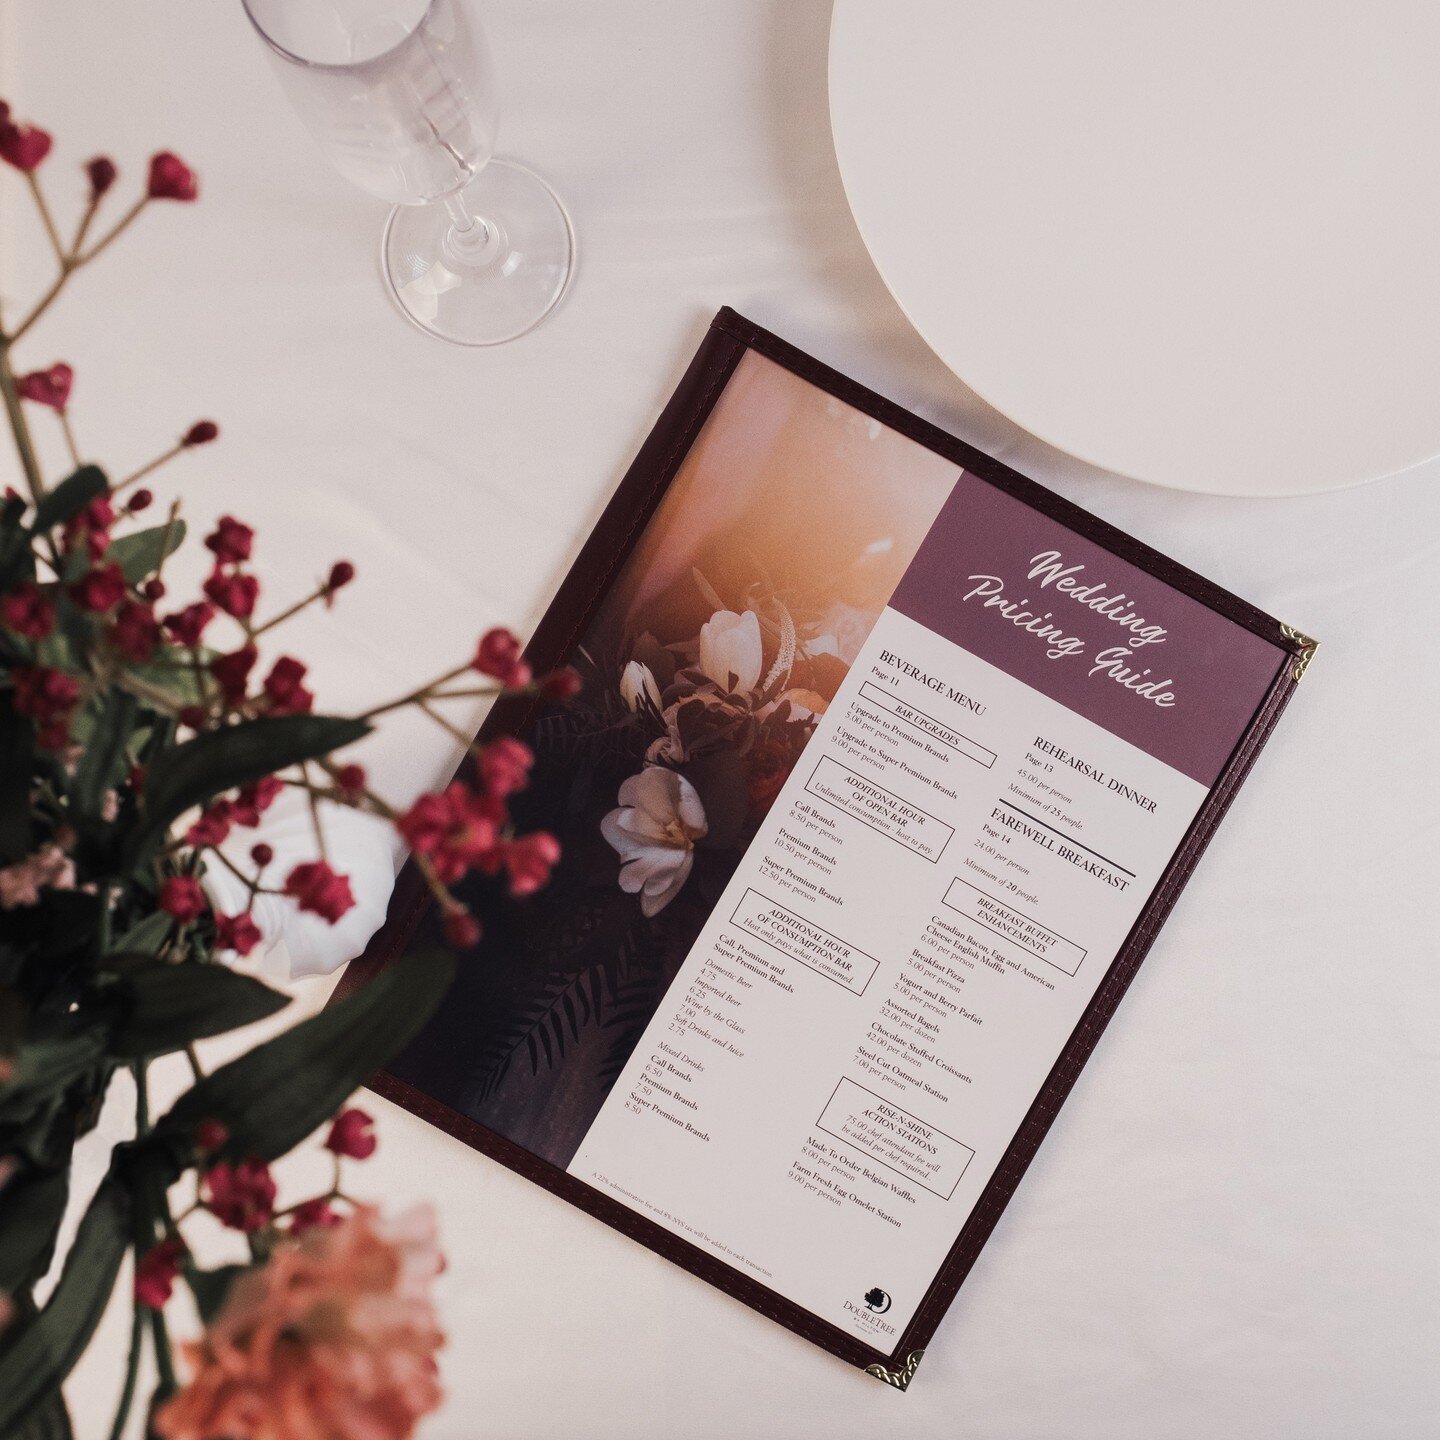 Our Deluxe Sewn Menu Covers are handmade in the USA and offer a wide range of custom options for you to choose from!⁠
-⁠
⁠
⁠
#coffee #wine #plantbased #glutenfree #cocktails #craftbeer #instagood #healthy #healthyfood #foodphotography #shoplocal ⁠
#b